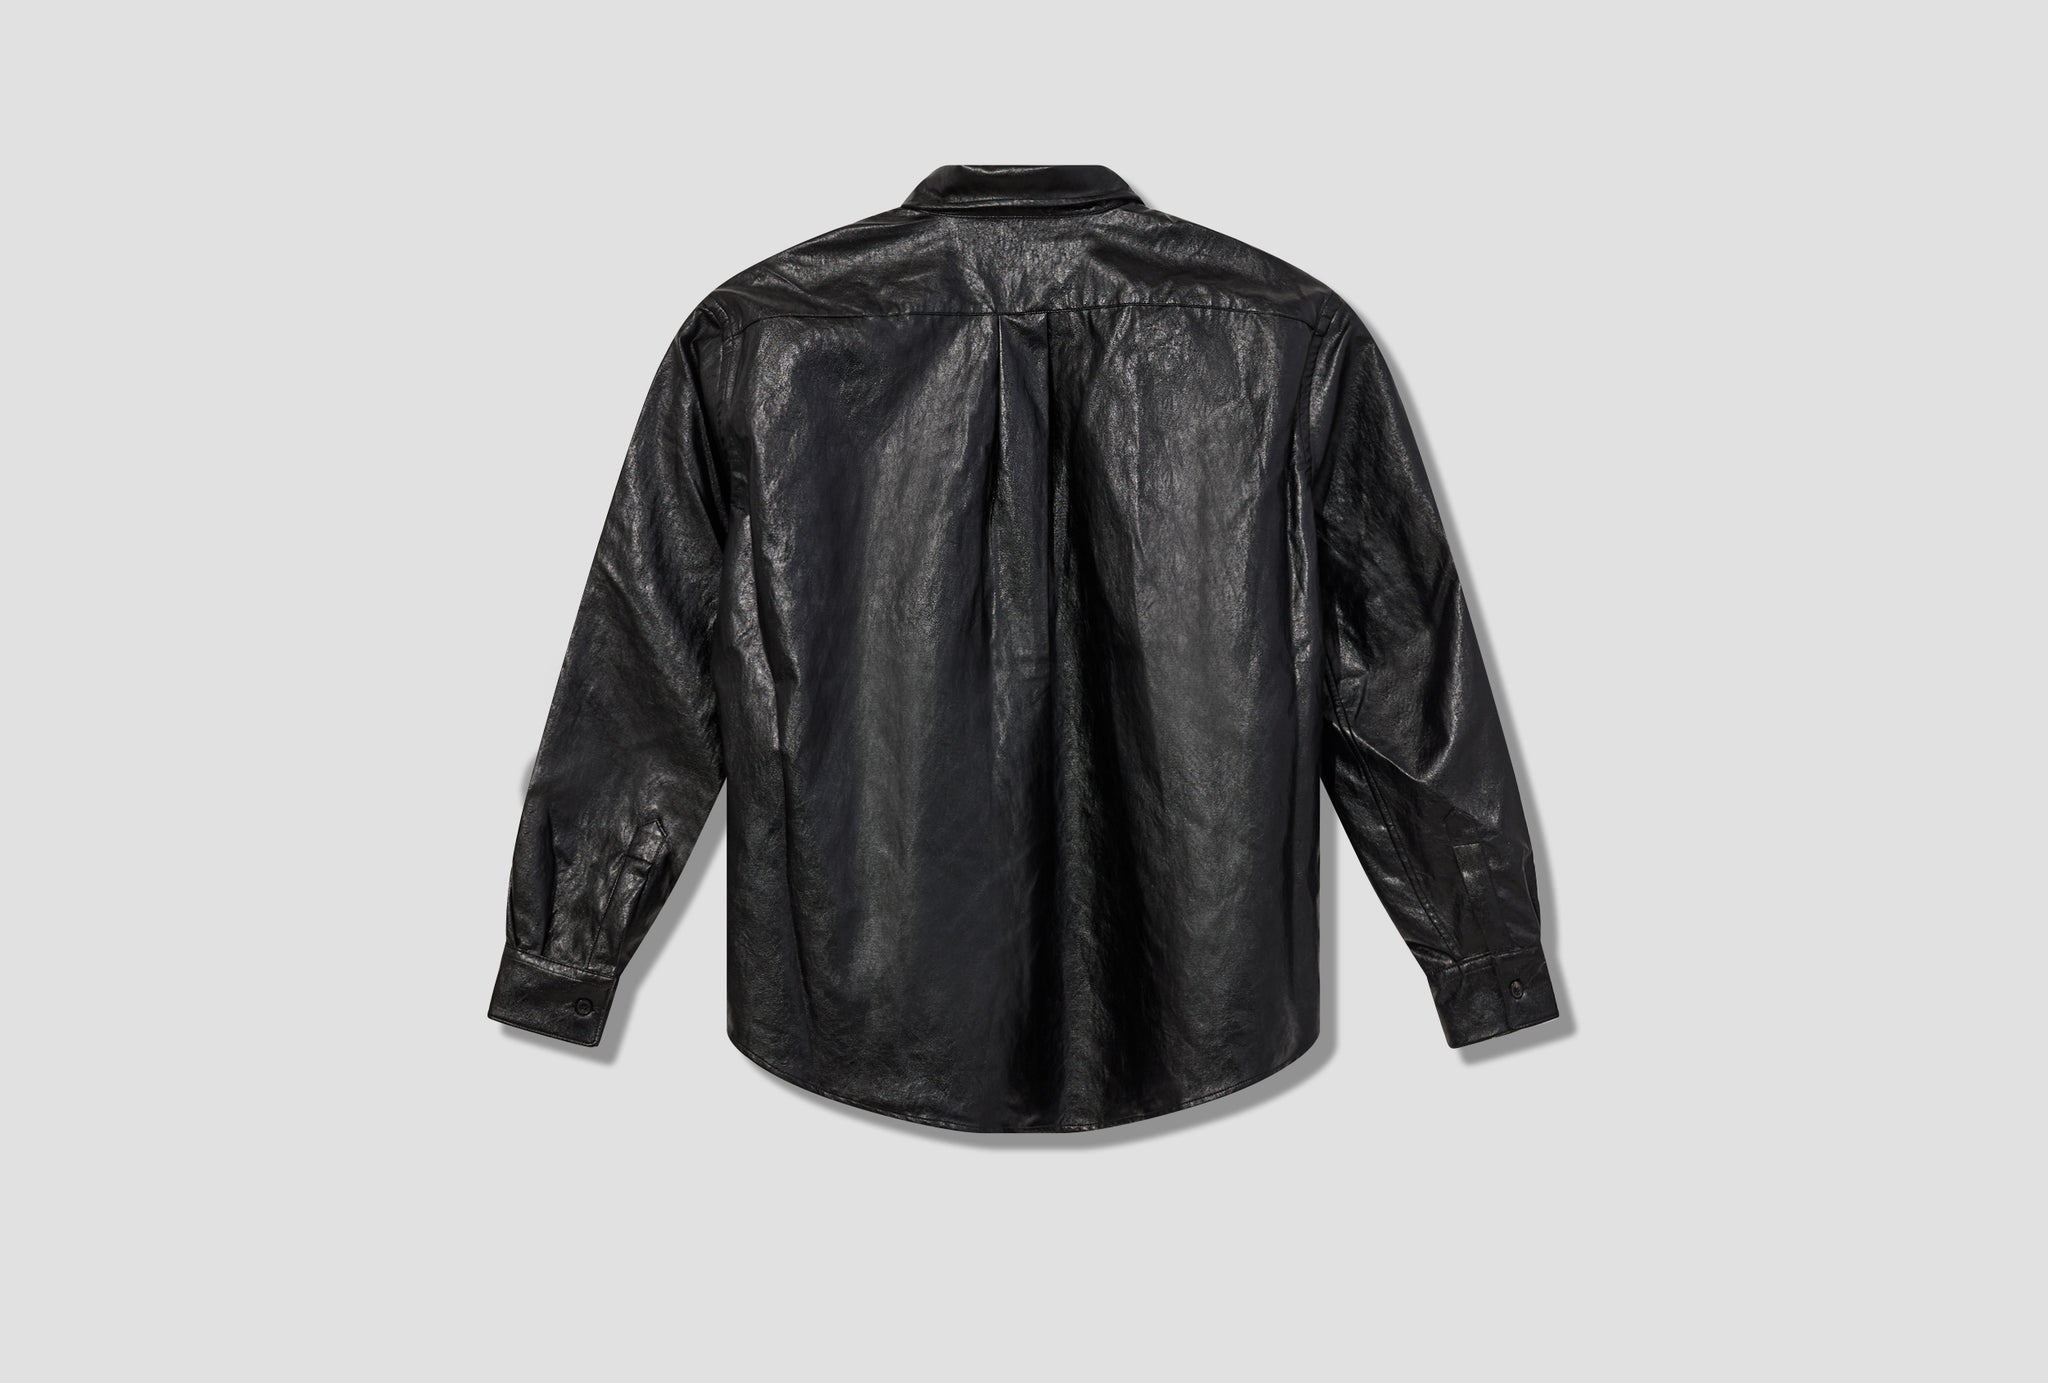 COCO 70S SHIRT - CAGEIAN BLACK FAKE LEATHER M4222CB Black